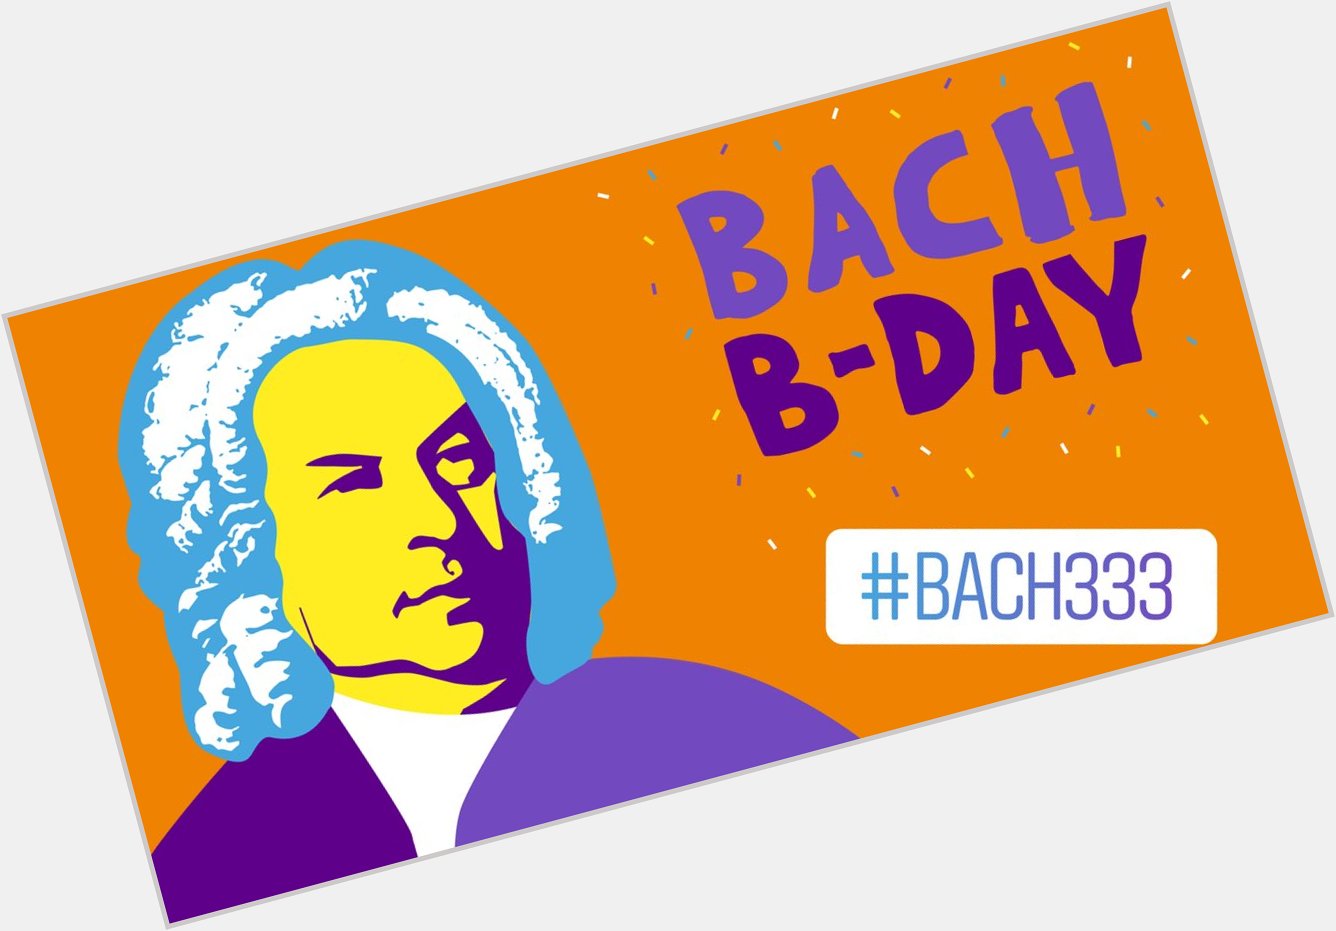 This join the Instagram Bach Birthday Party  via 